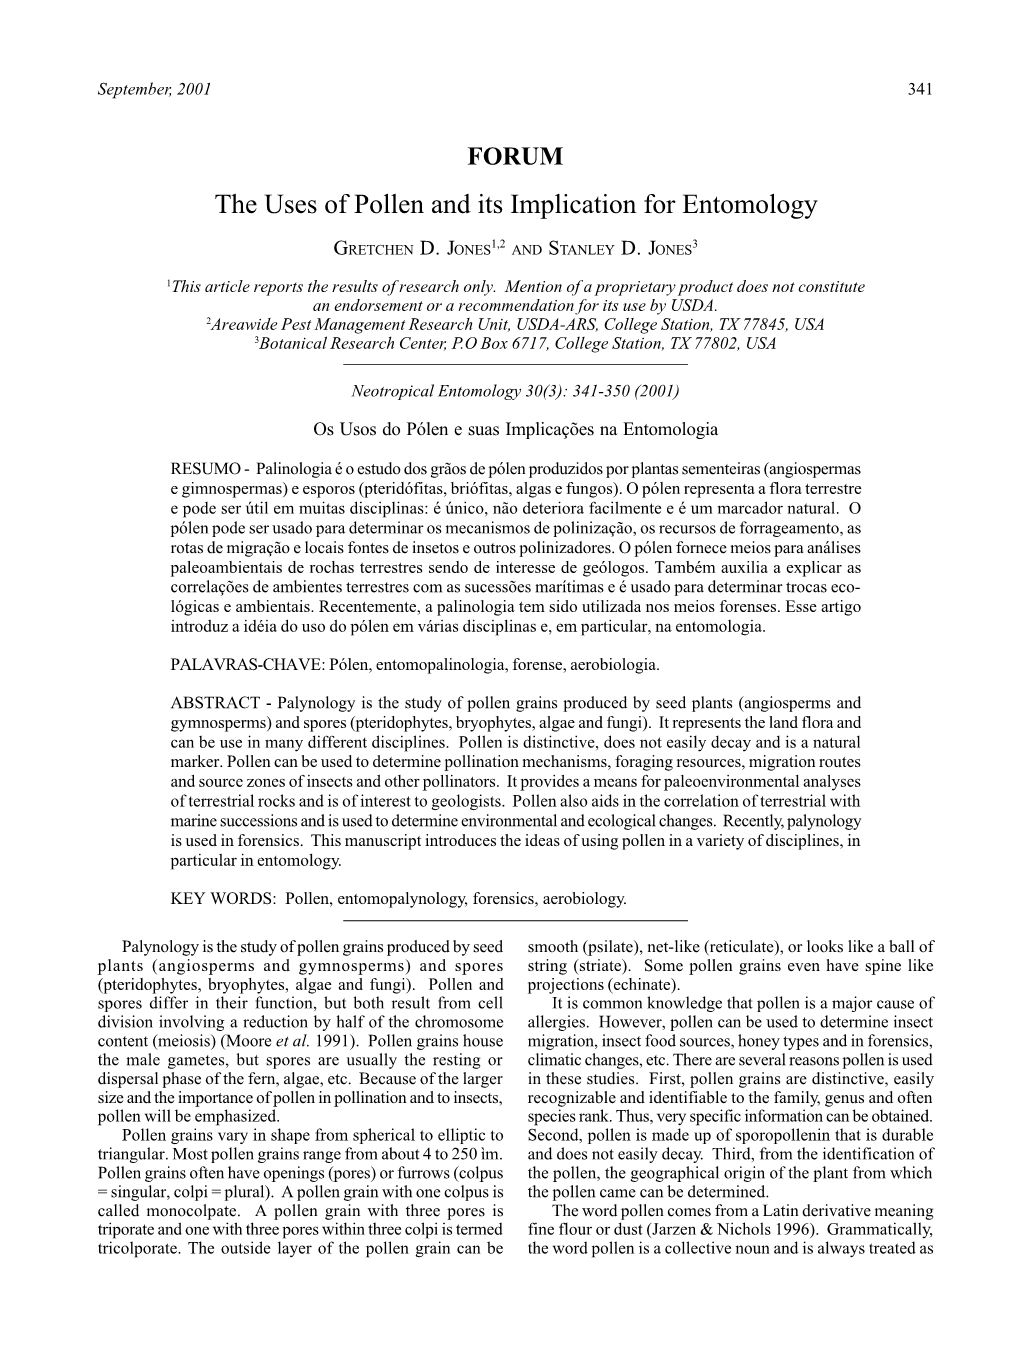 The Uses of Pollen and Its Implication for Entomology